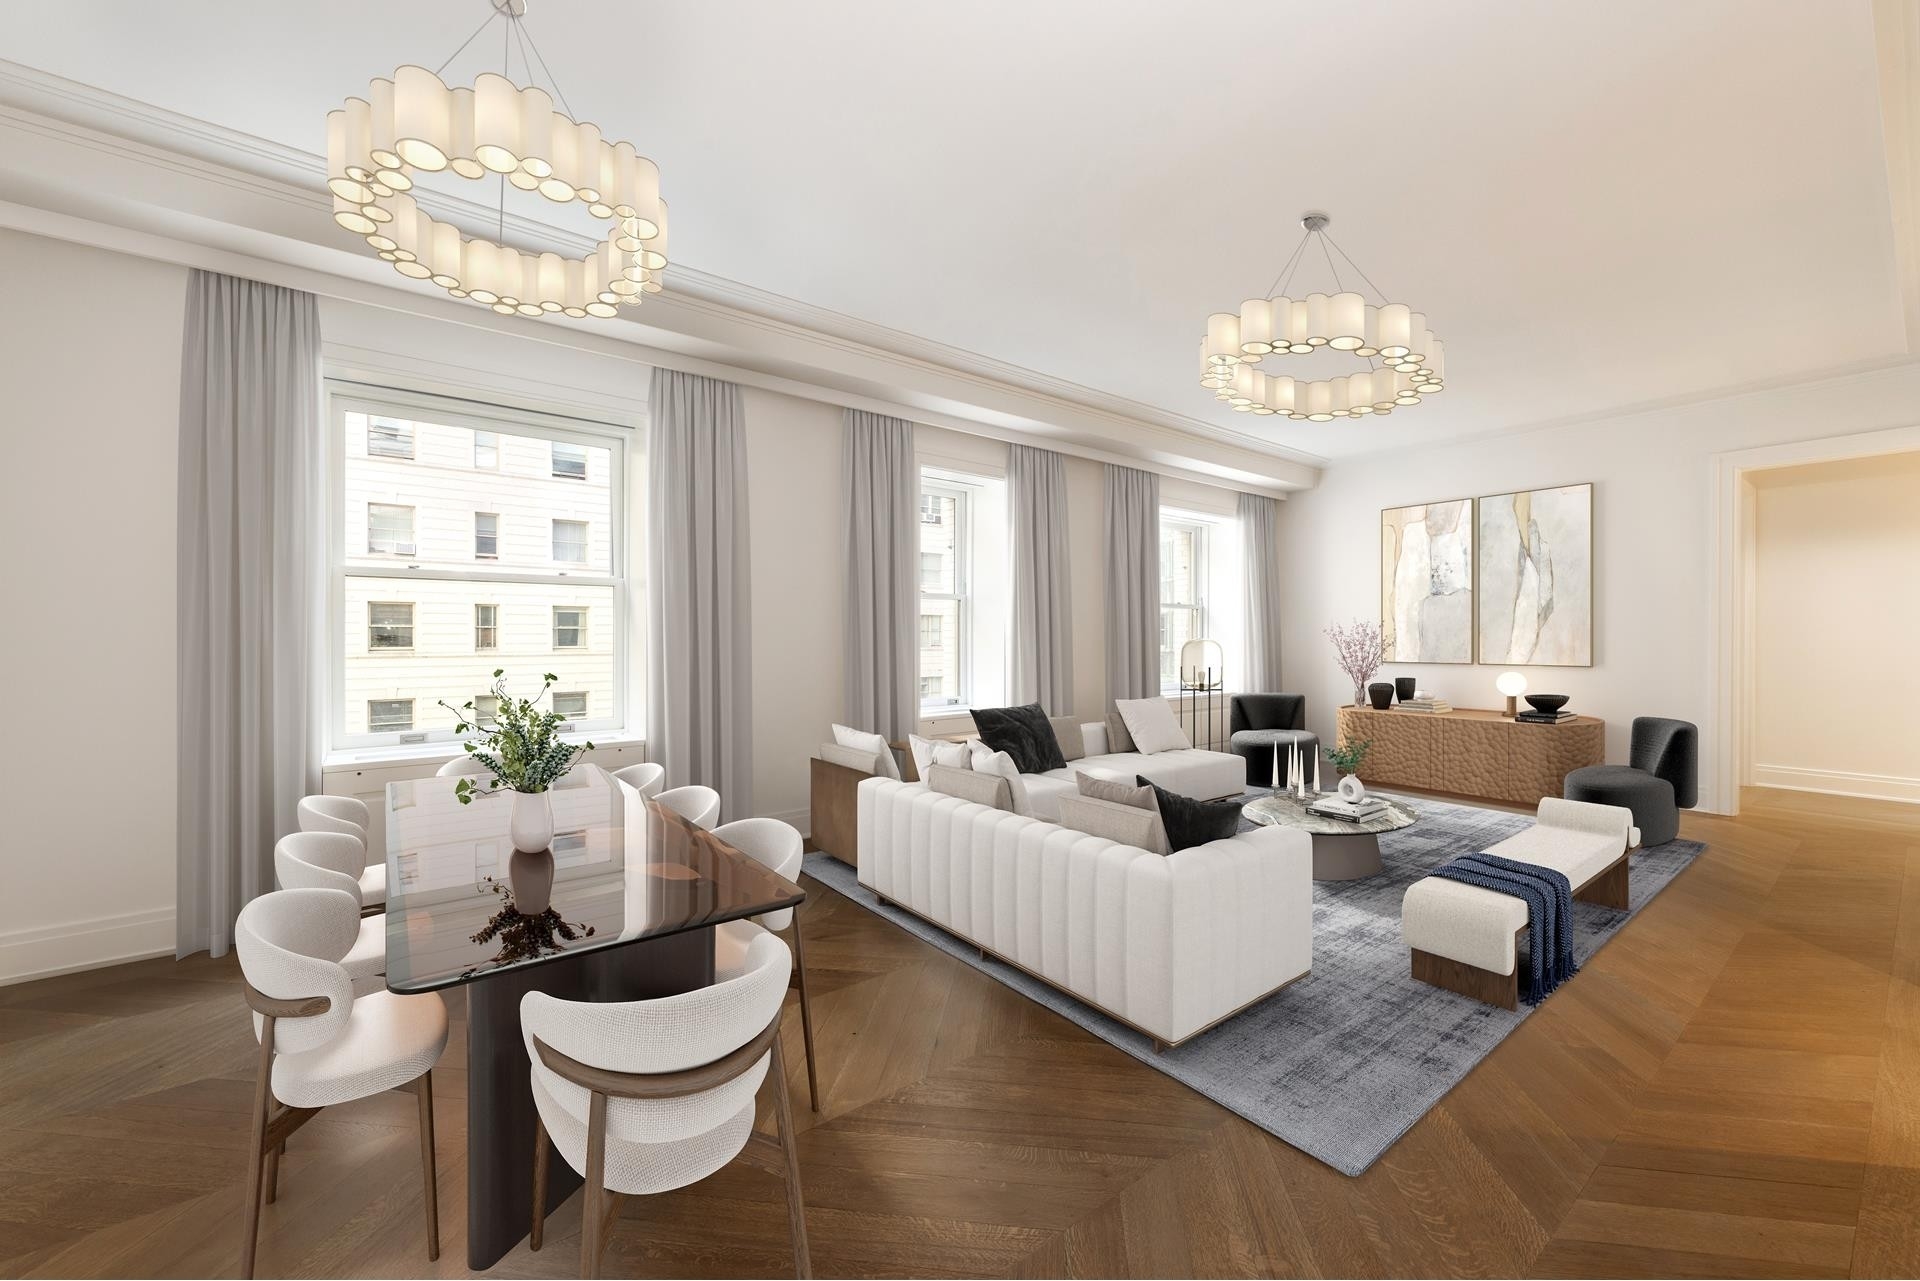 Condominium for Sale at The Belnord, 225 W 86TH ST, 1012 Upper West Side, New York, New York 10024